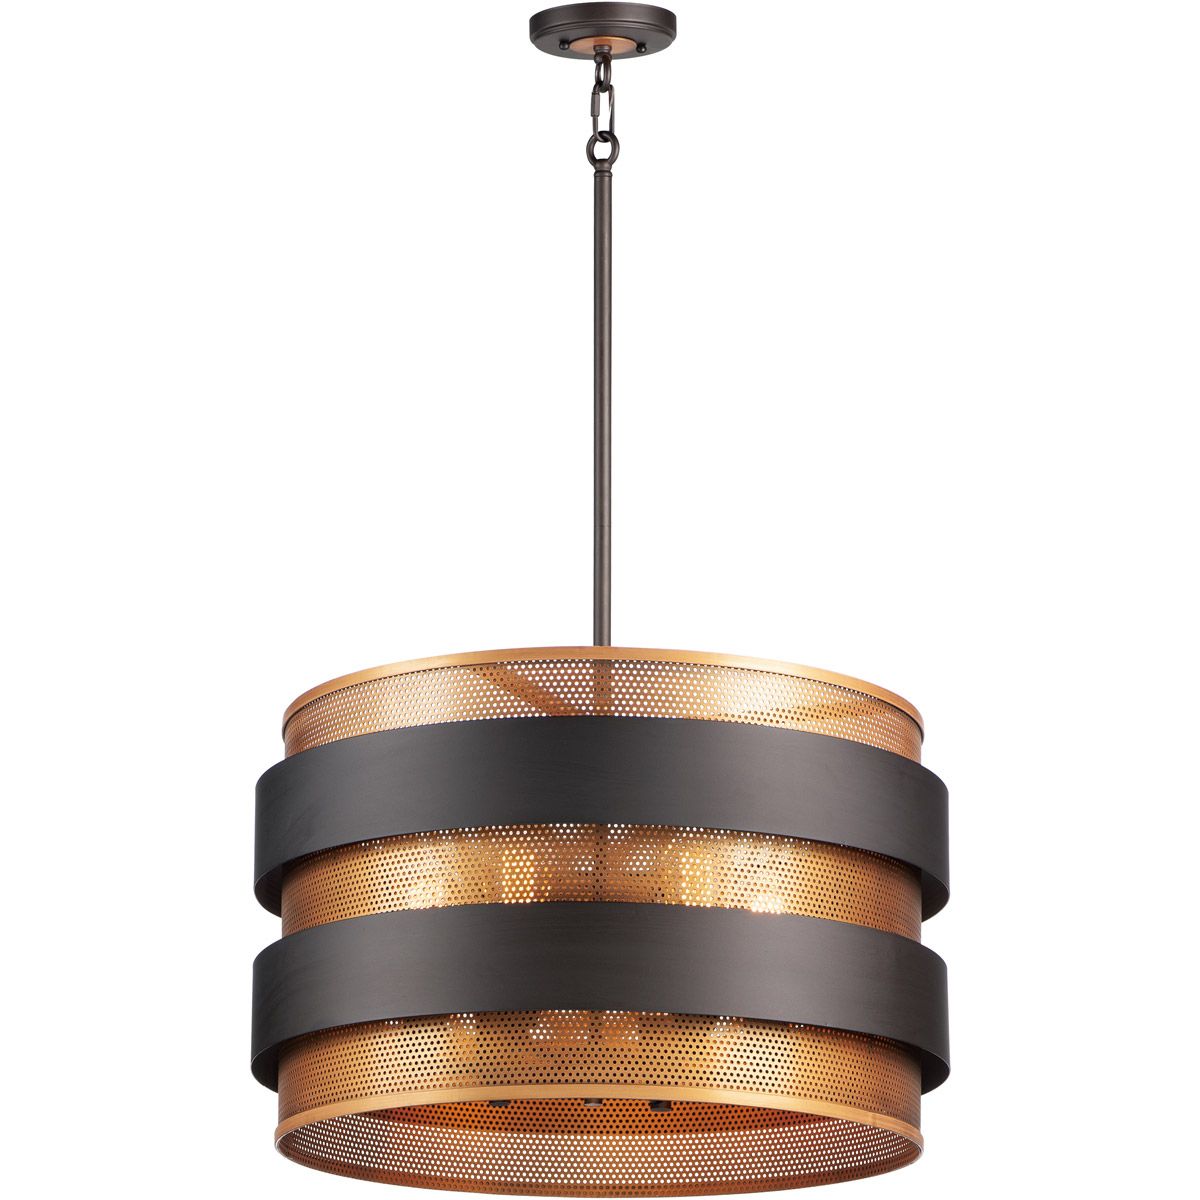 Well Known Oil Rubbed Bronze And Antique Brass Four Light Chandeliers Pertaining To Maxim Lighting 31205Oiab Caspian Pendant Oil Rubbed Bronze (View 5 of 15)